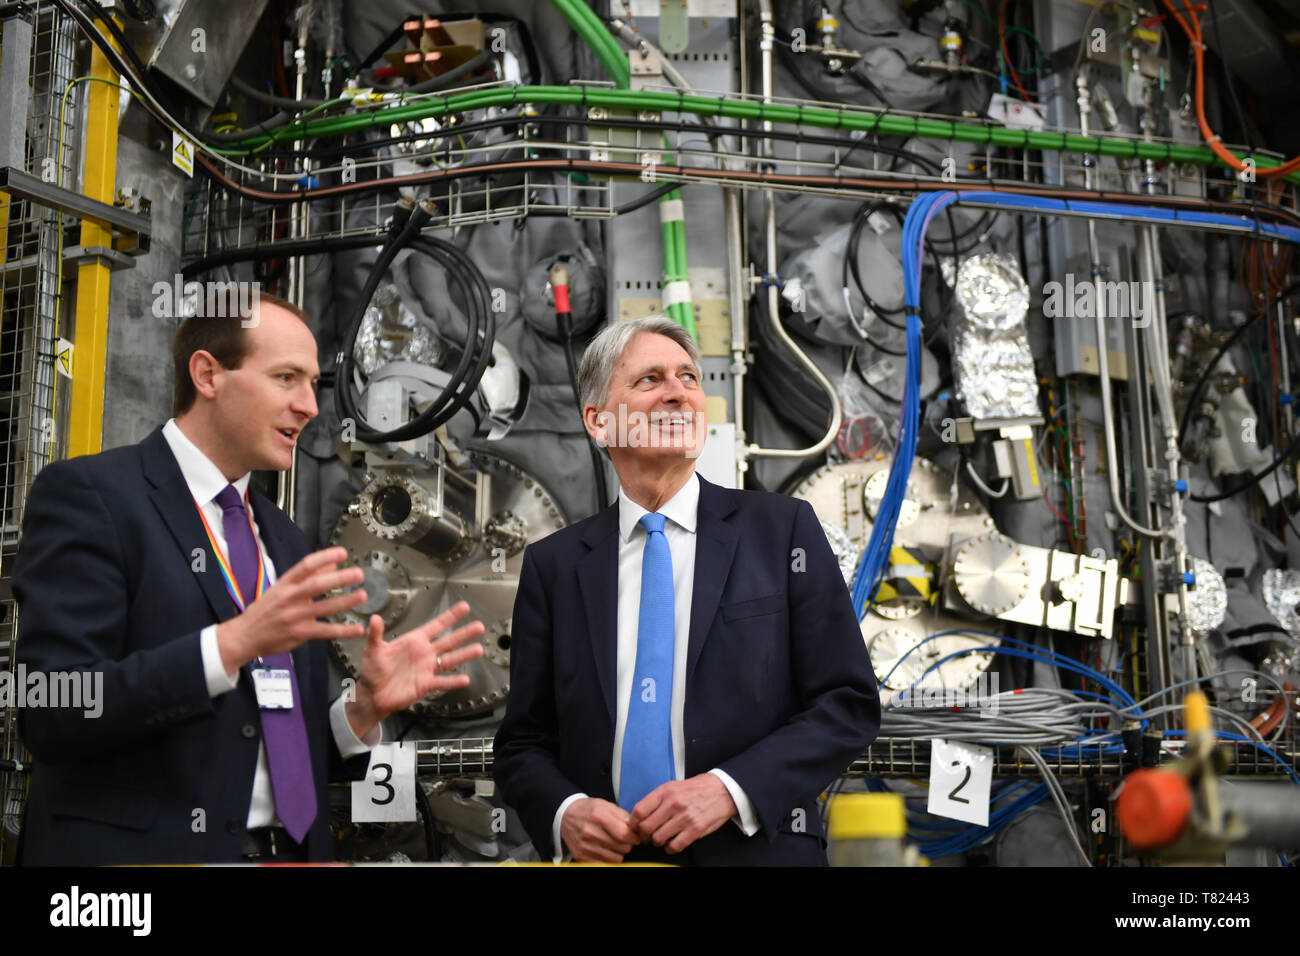 Chancellor Philip Hammond speaking to Ian Chapman, Chief Executive of the UK Atomic Energy Authority, in front of nuclear infusion scientific equipment, as he marks the publication of the UK gross domestic product (GDP) first quarterly estimate during a visit to the Culham Science Centre in Abingdon, Oxfordshire. Stock Photo